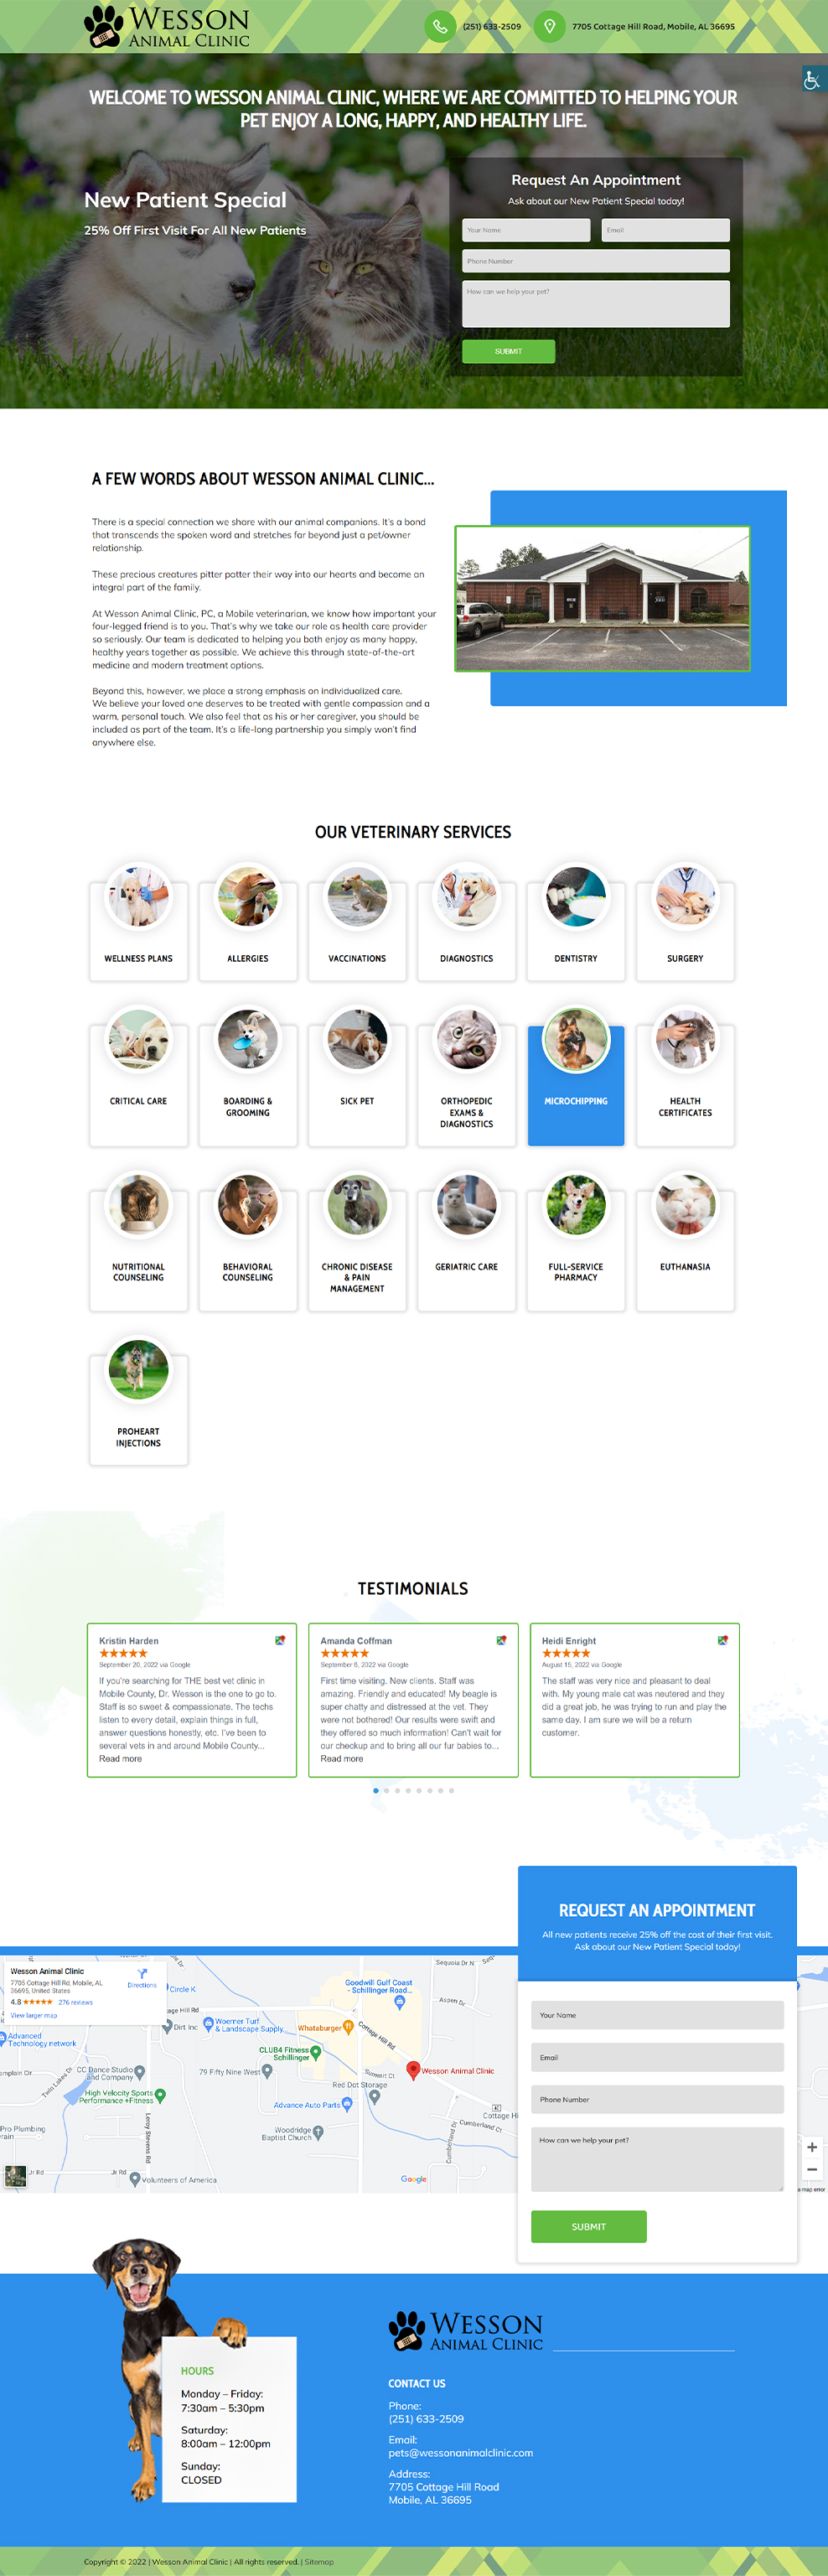 wesson-animal-clinic-landing-page